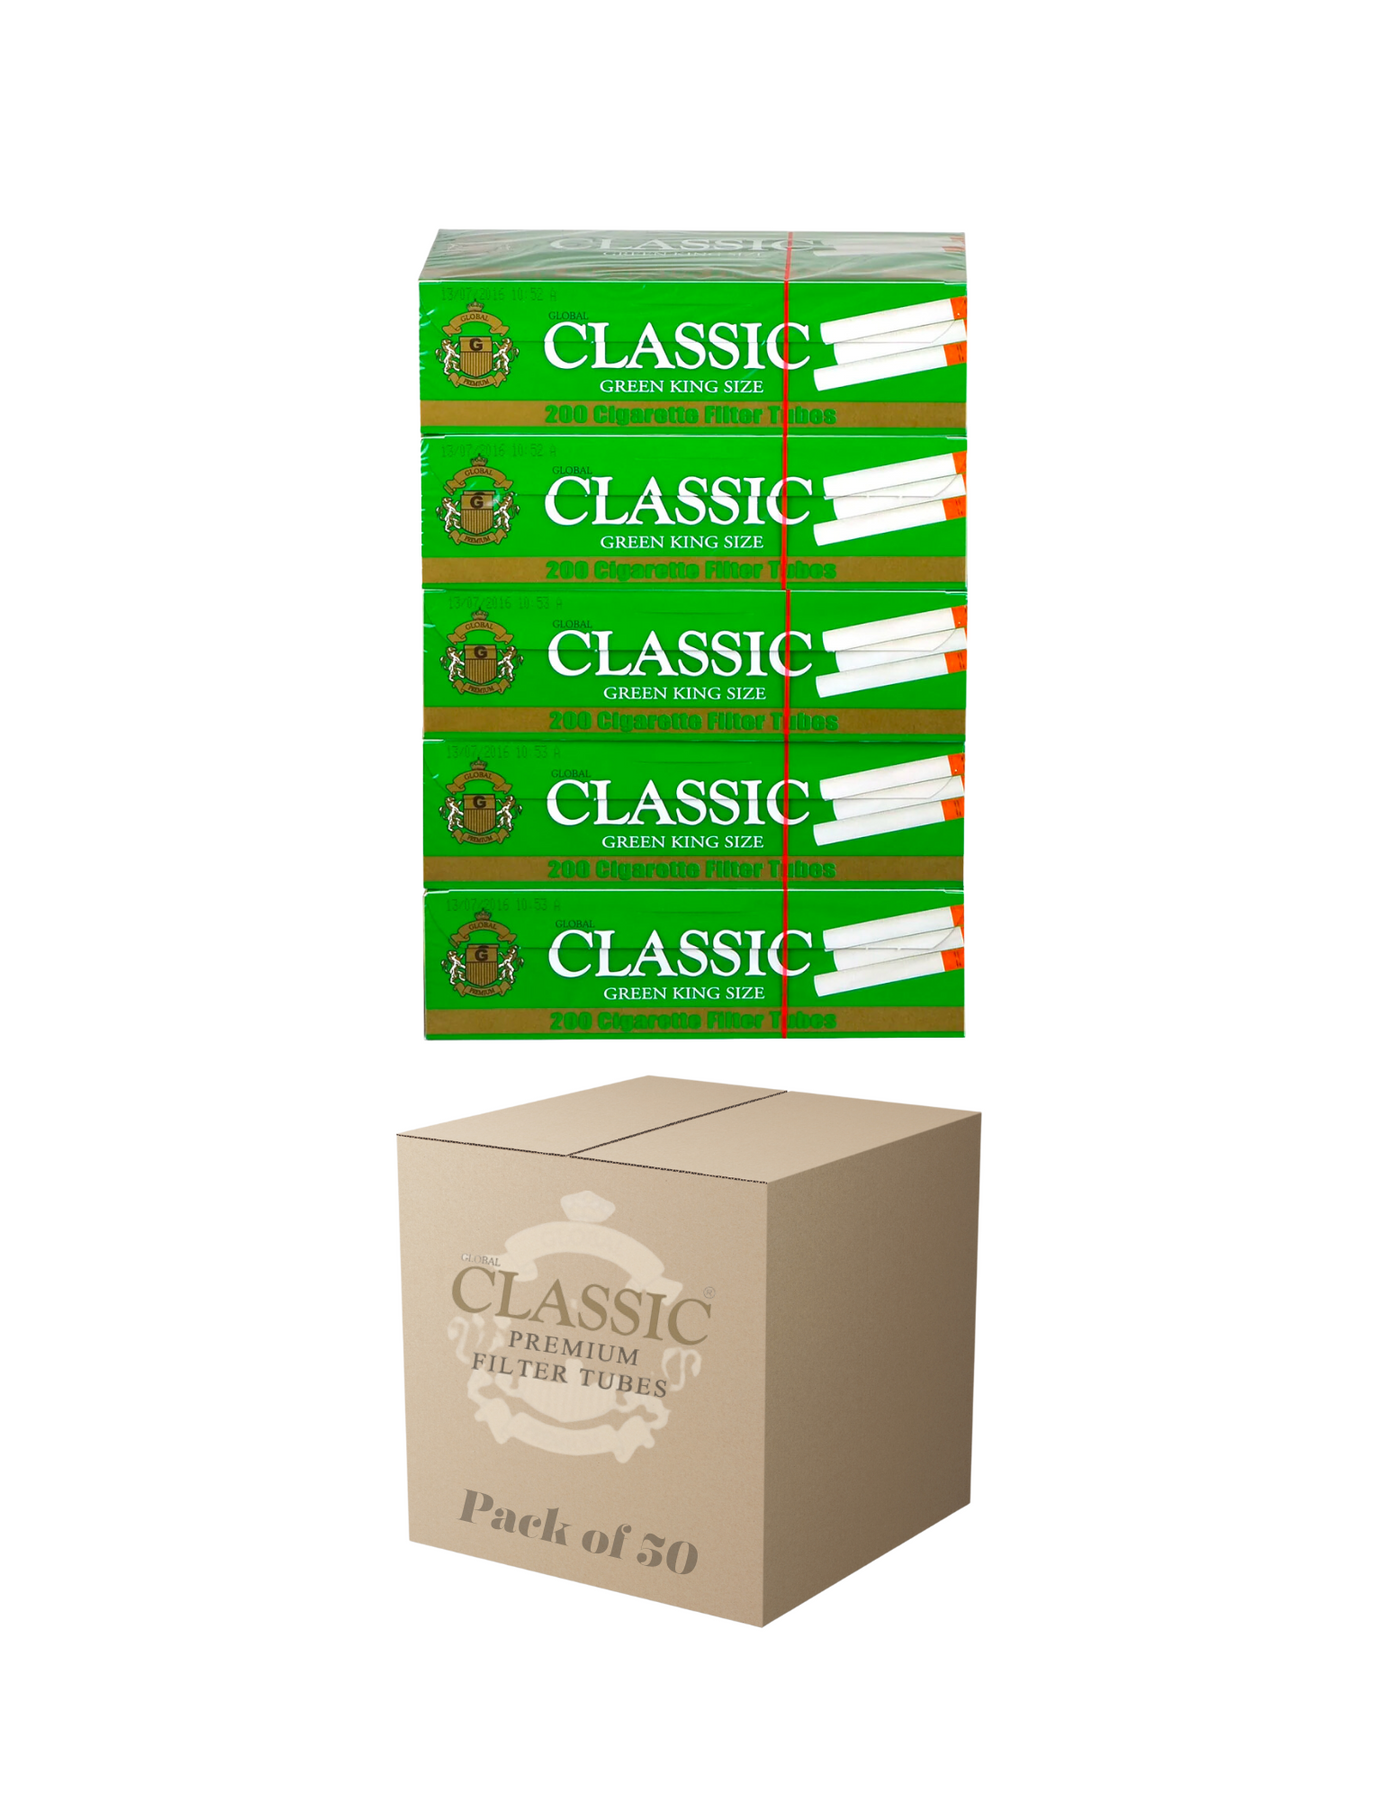 Classic Filter Tubes 100mm Menthol (Green) 5 Cartons of 200